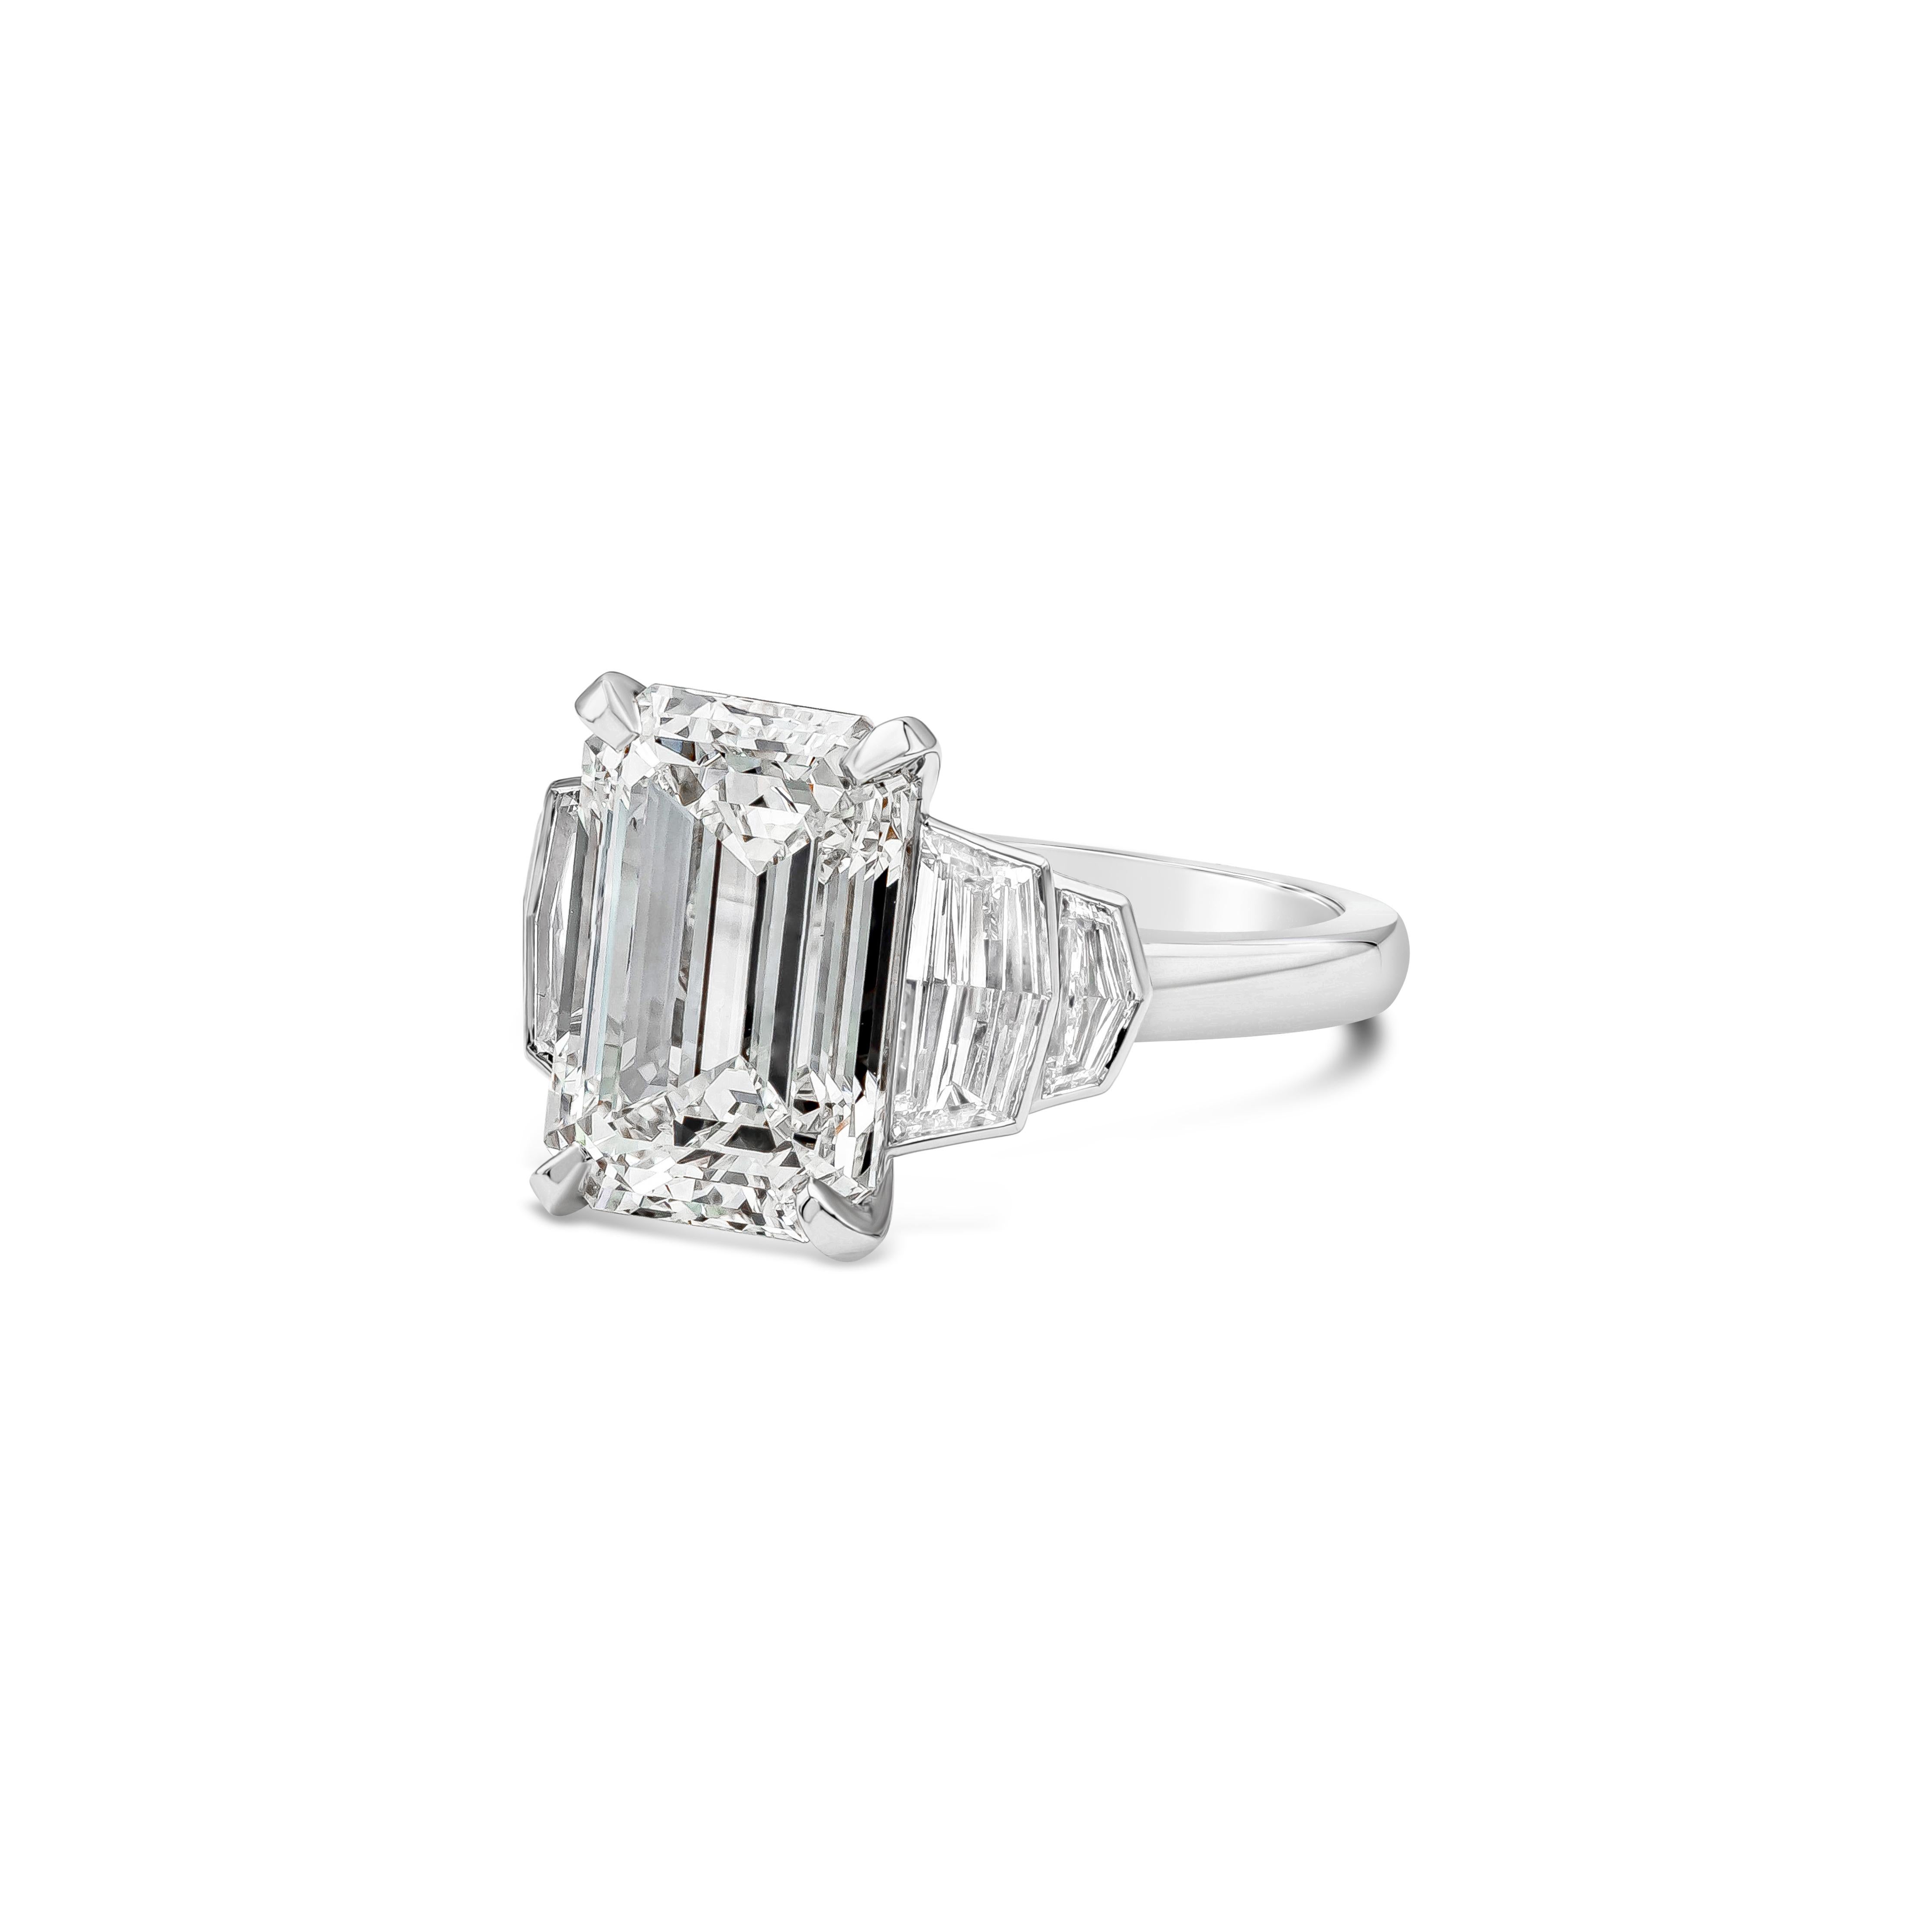 Elegant and well crafted three stone engagement ring features a 5.01 carat emerald cut diamond certified by GIA as J color, SI2 clarity, set in a platinum four prong setting. Flanked by step-cut epaulette diamonds on either side. The four accent